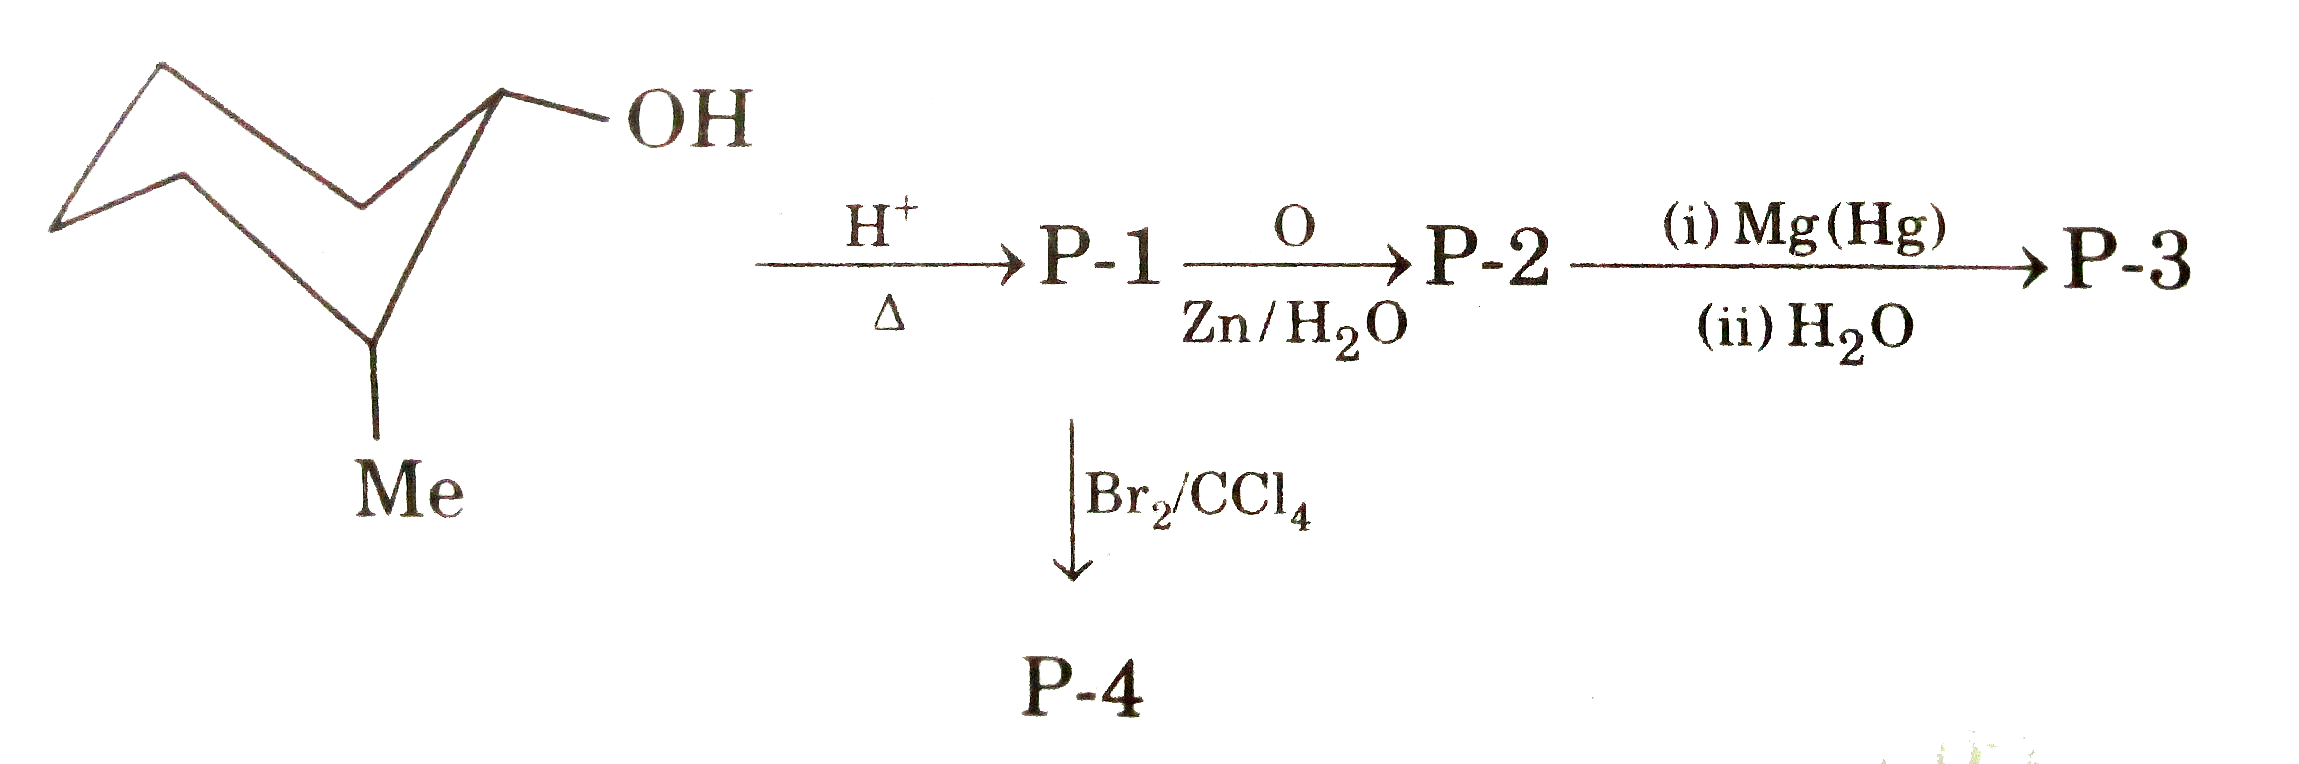 correct sequence of reagents to convert P-4 into P-3: